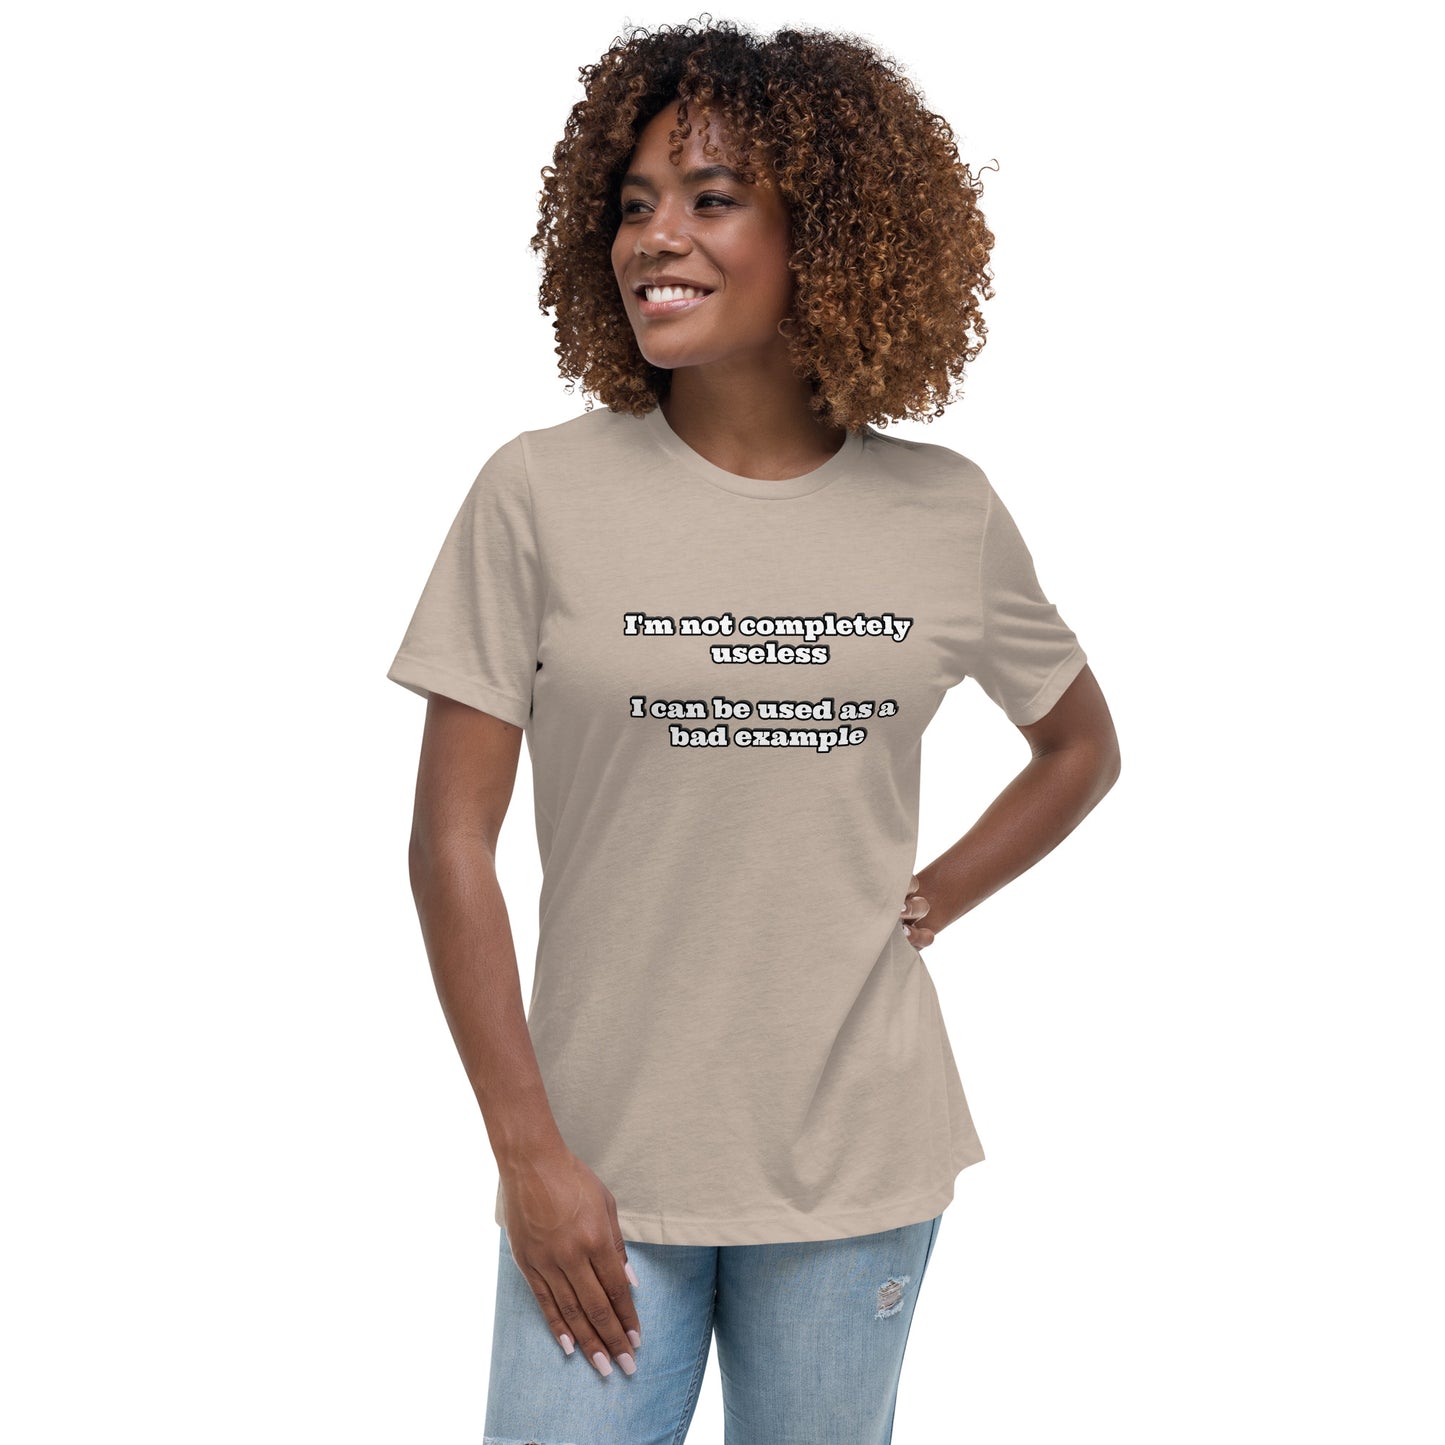 Women with stone brown t-shirt with text “I'm not completely useless I can be used as a bad example”